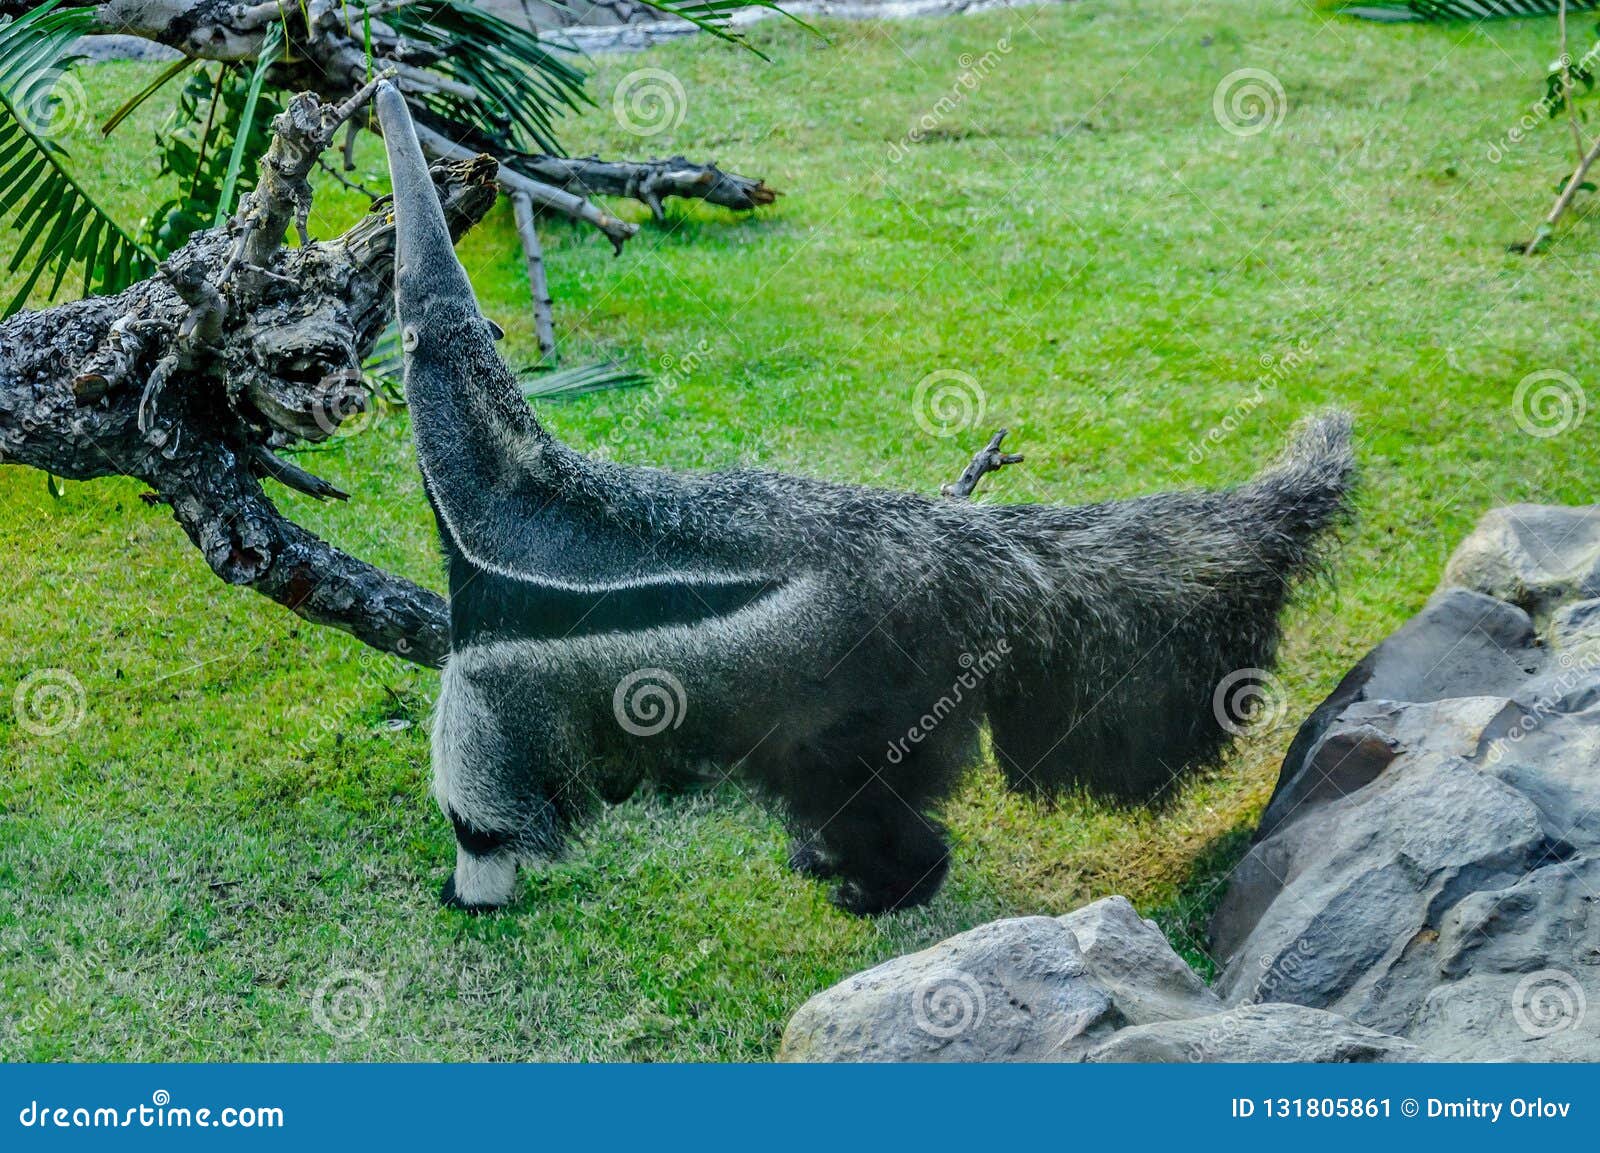 ant-eater in loro parque, tenerife, canary islands